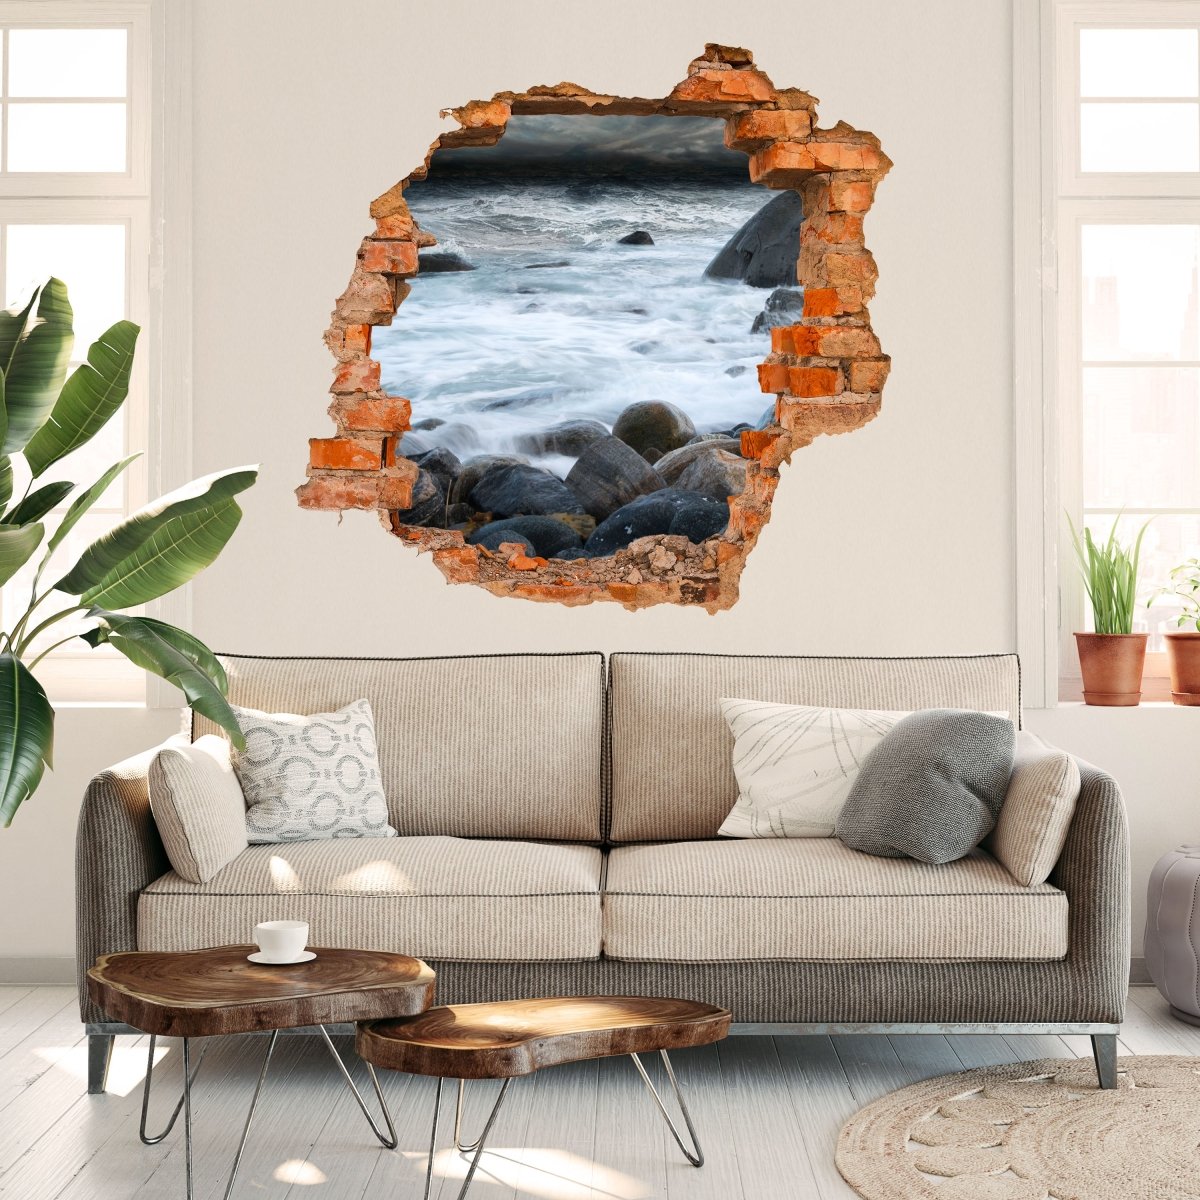 3D wall sticker Stormy weather in Alnes, Giske - Wall decal M1042